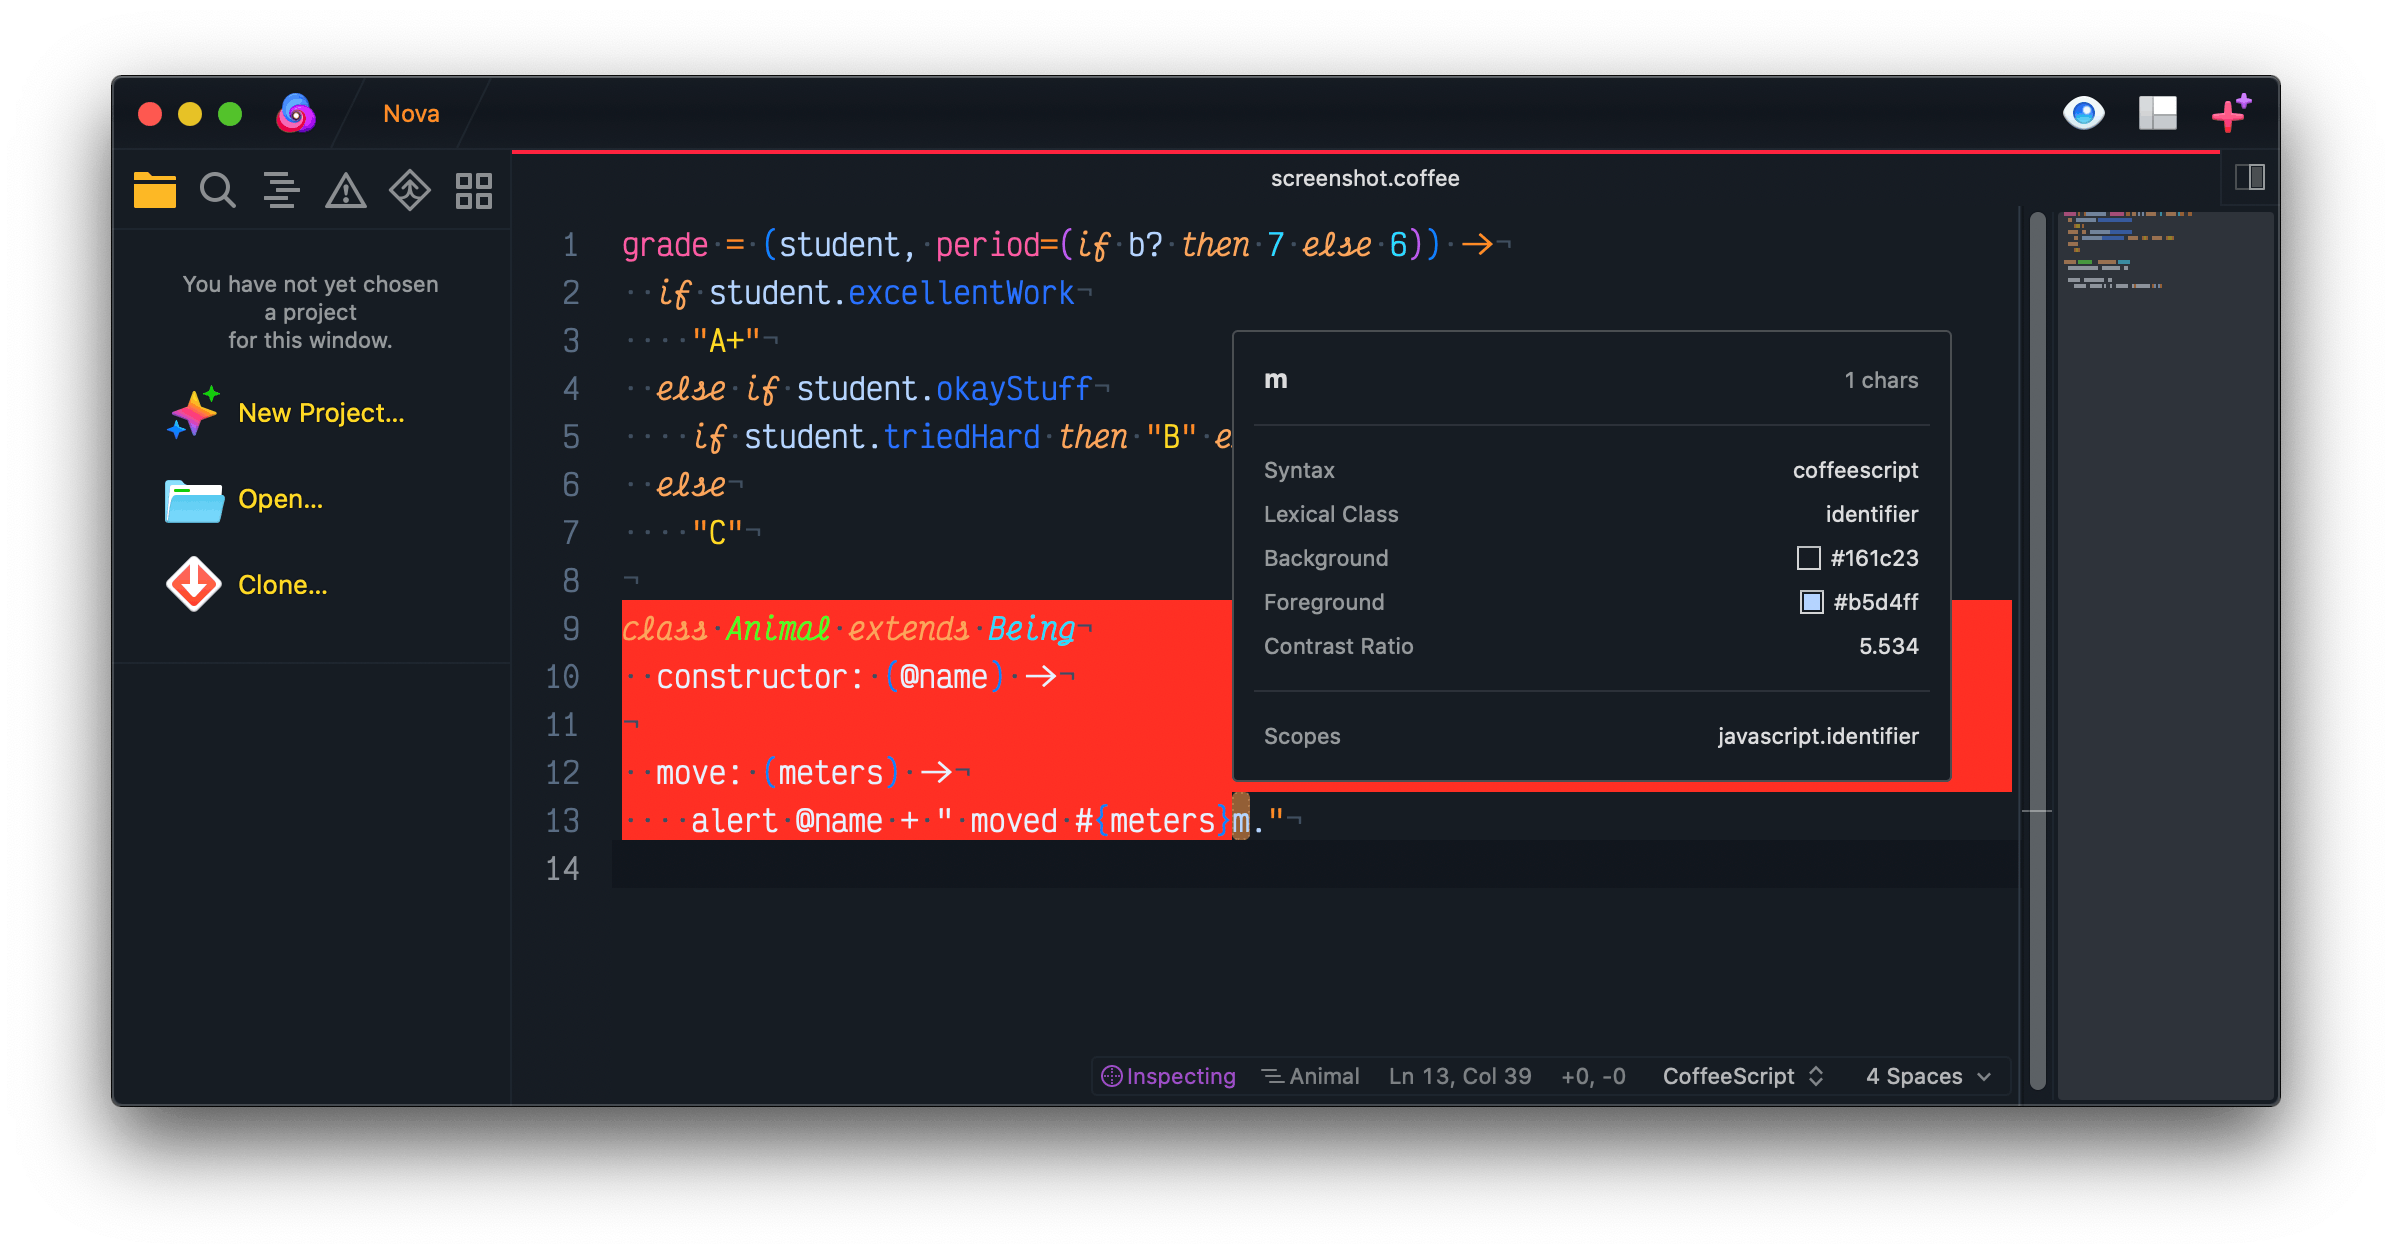 For debugging, I use a white font on a red background.